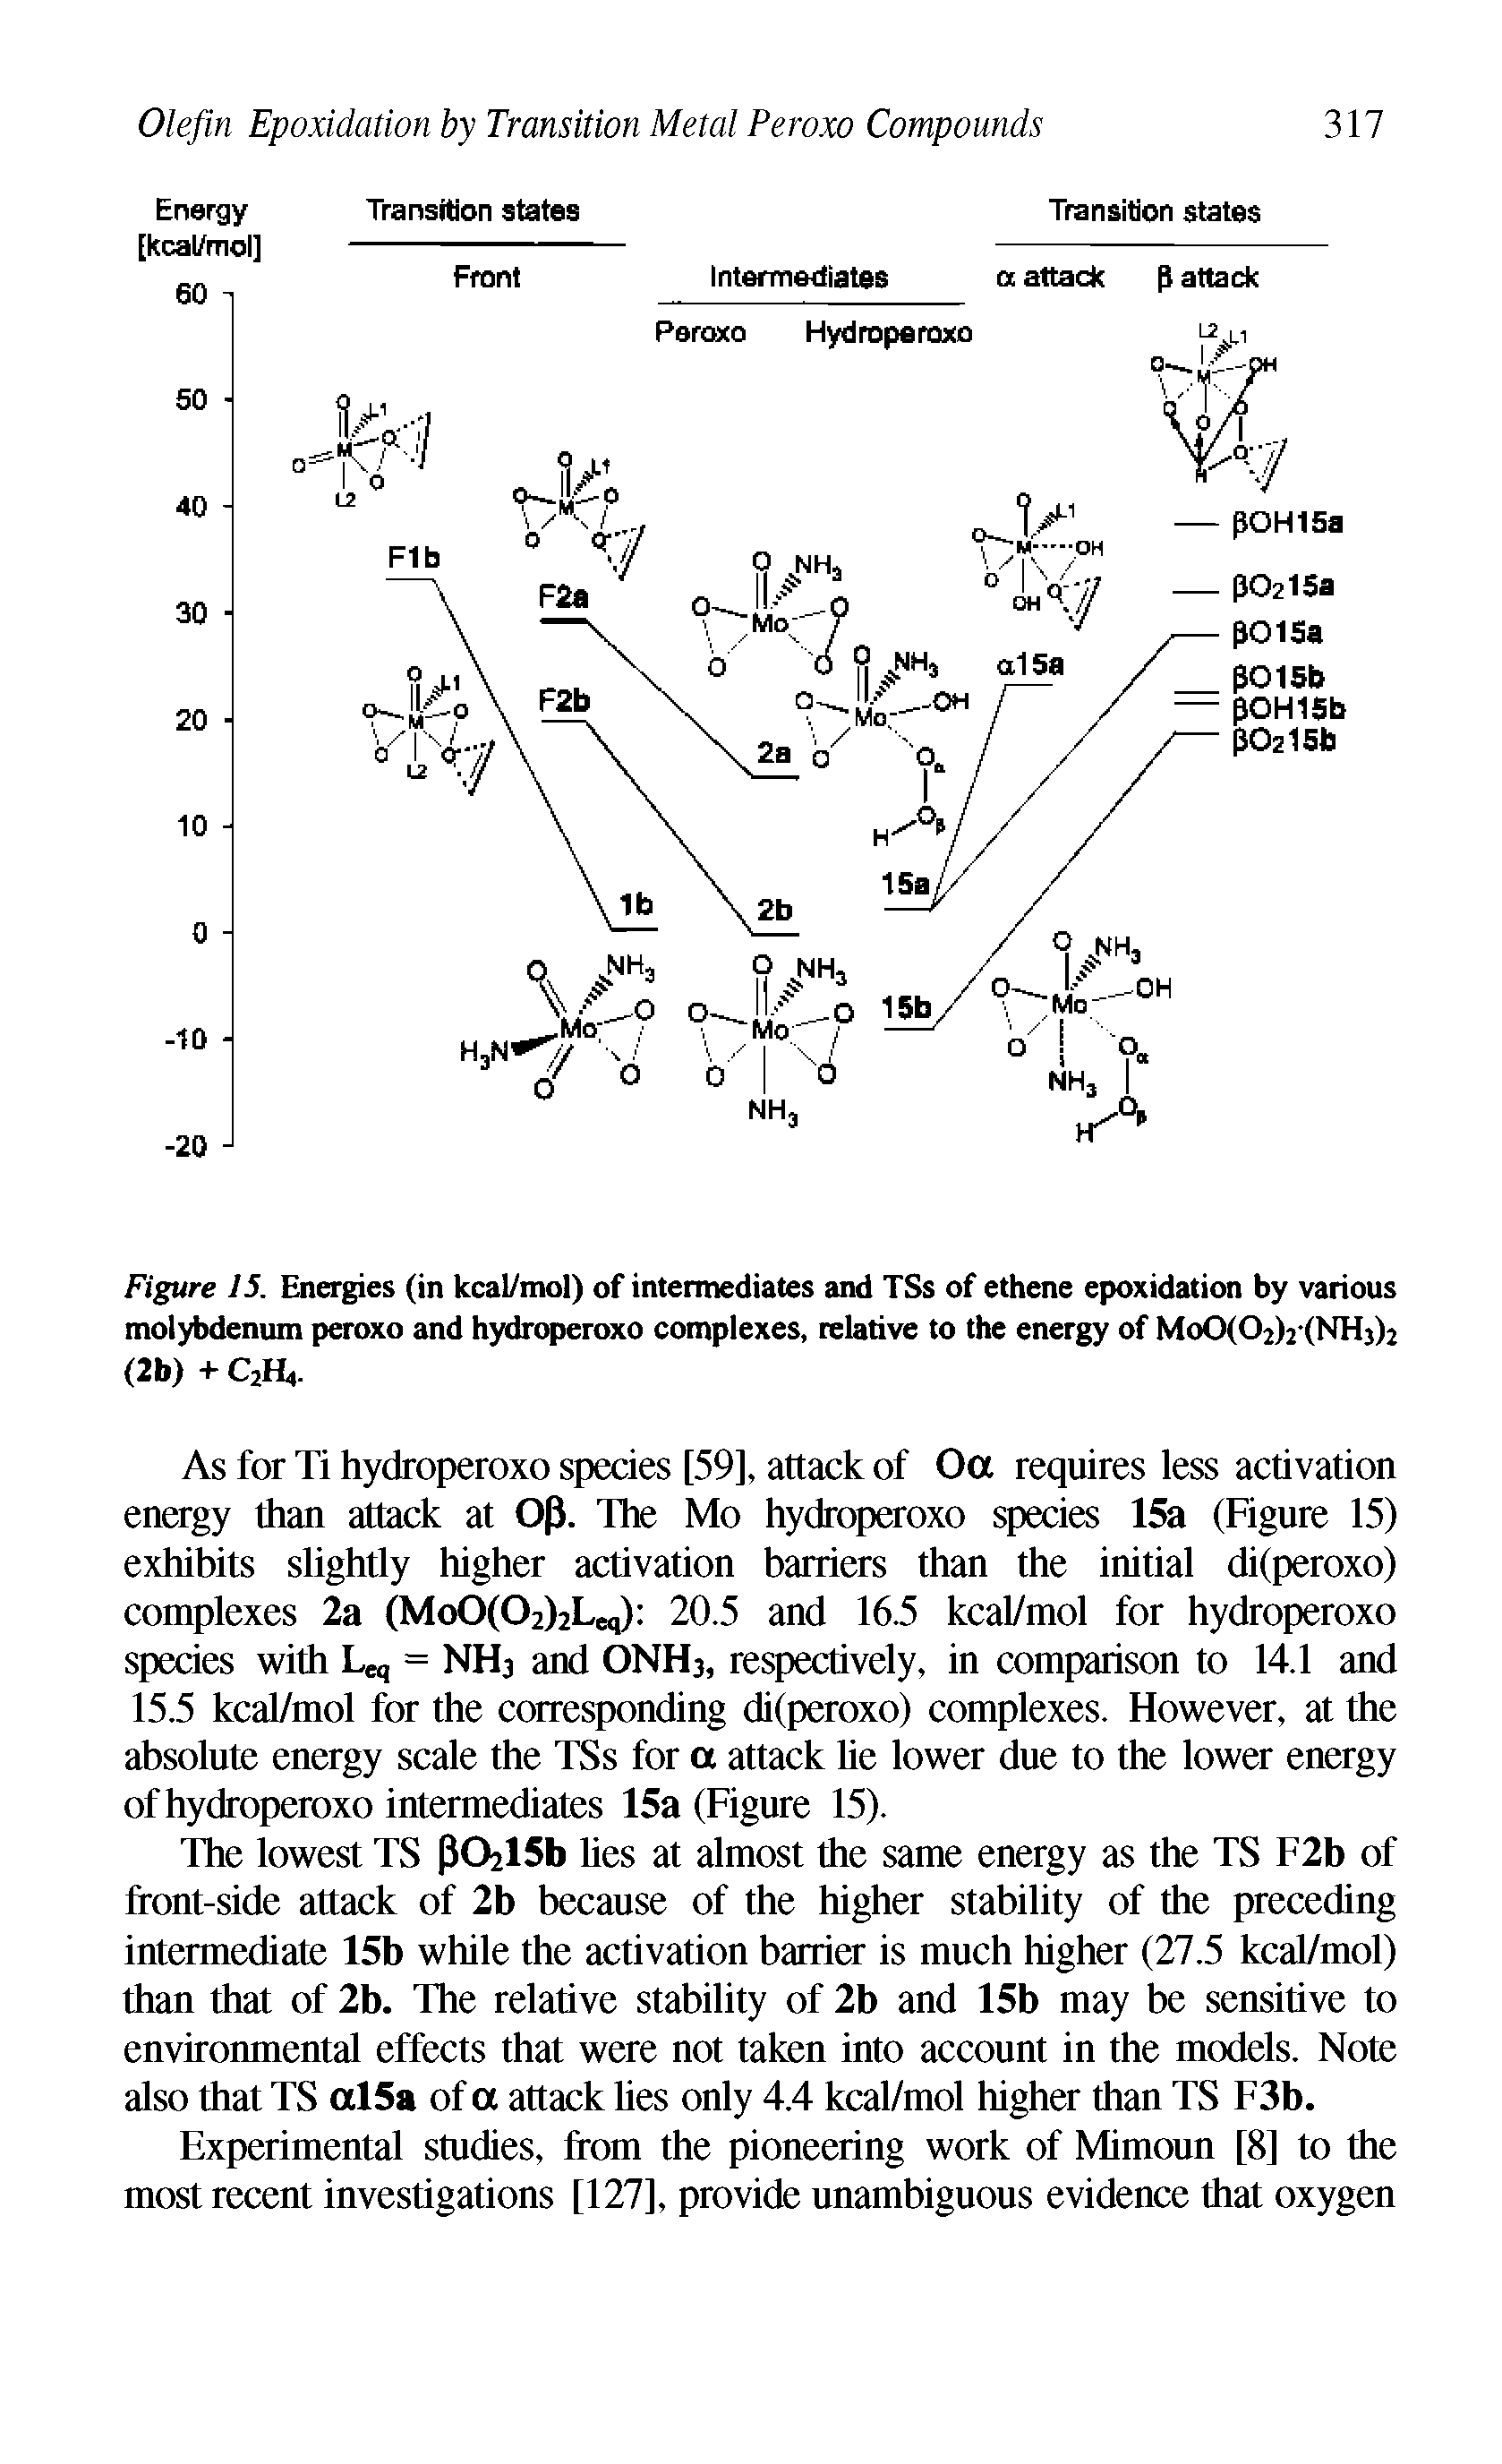 Figure 15. Energies (in kcal/mol) of intermediates and TSs of ethene epoxidation by various molybdenum peroxo and hydroperoxo complexes, relative to the energy of MoOtC h tNHjh (2b) +C2H4.